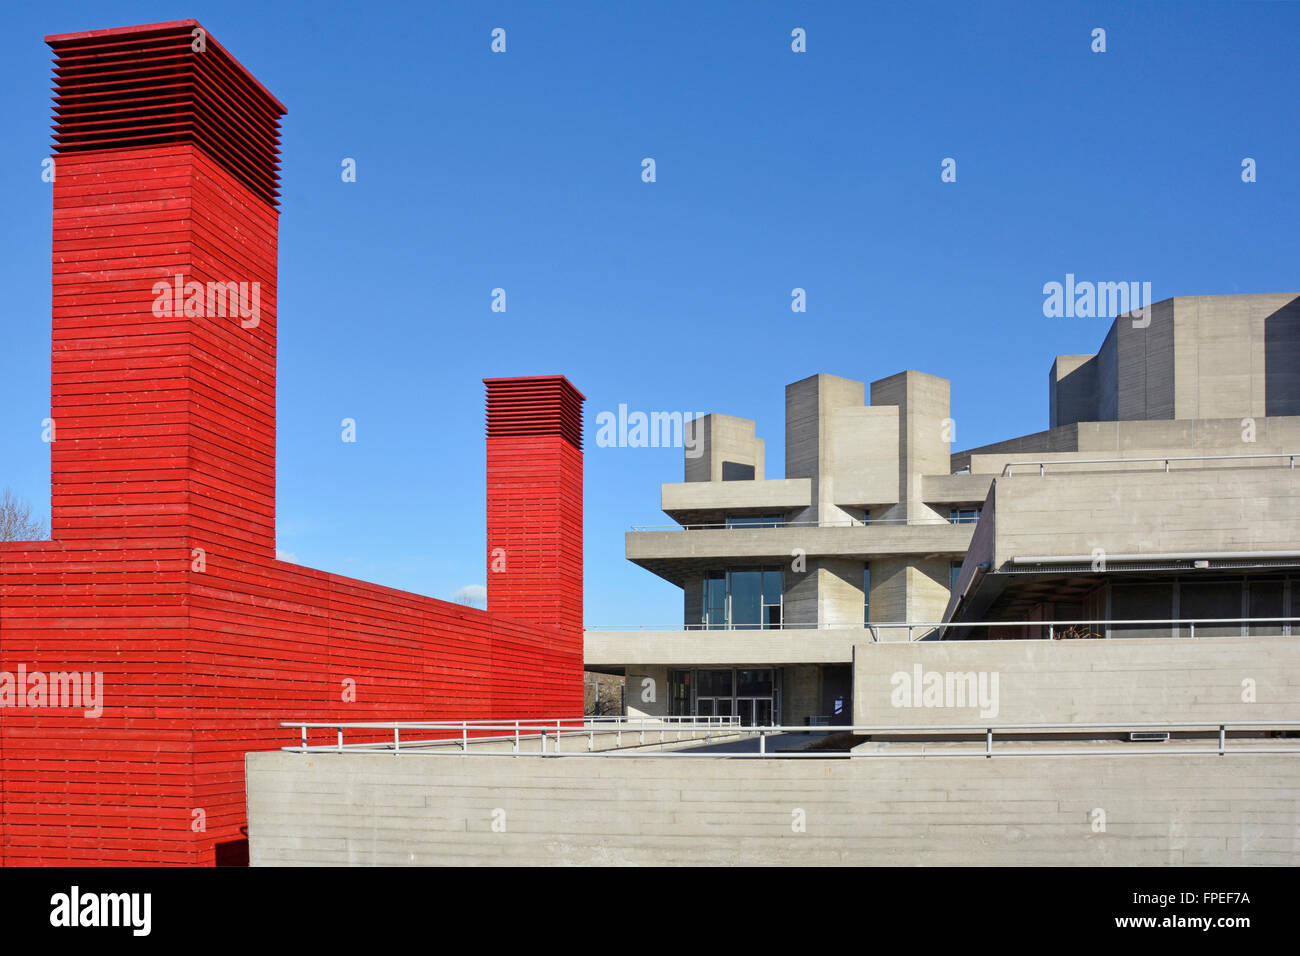 Red Shed temporary Theatre space contrasted board finish brutalist concrete architecture of original National Theatre South Bank Lambeth London UK Stock Photo